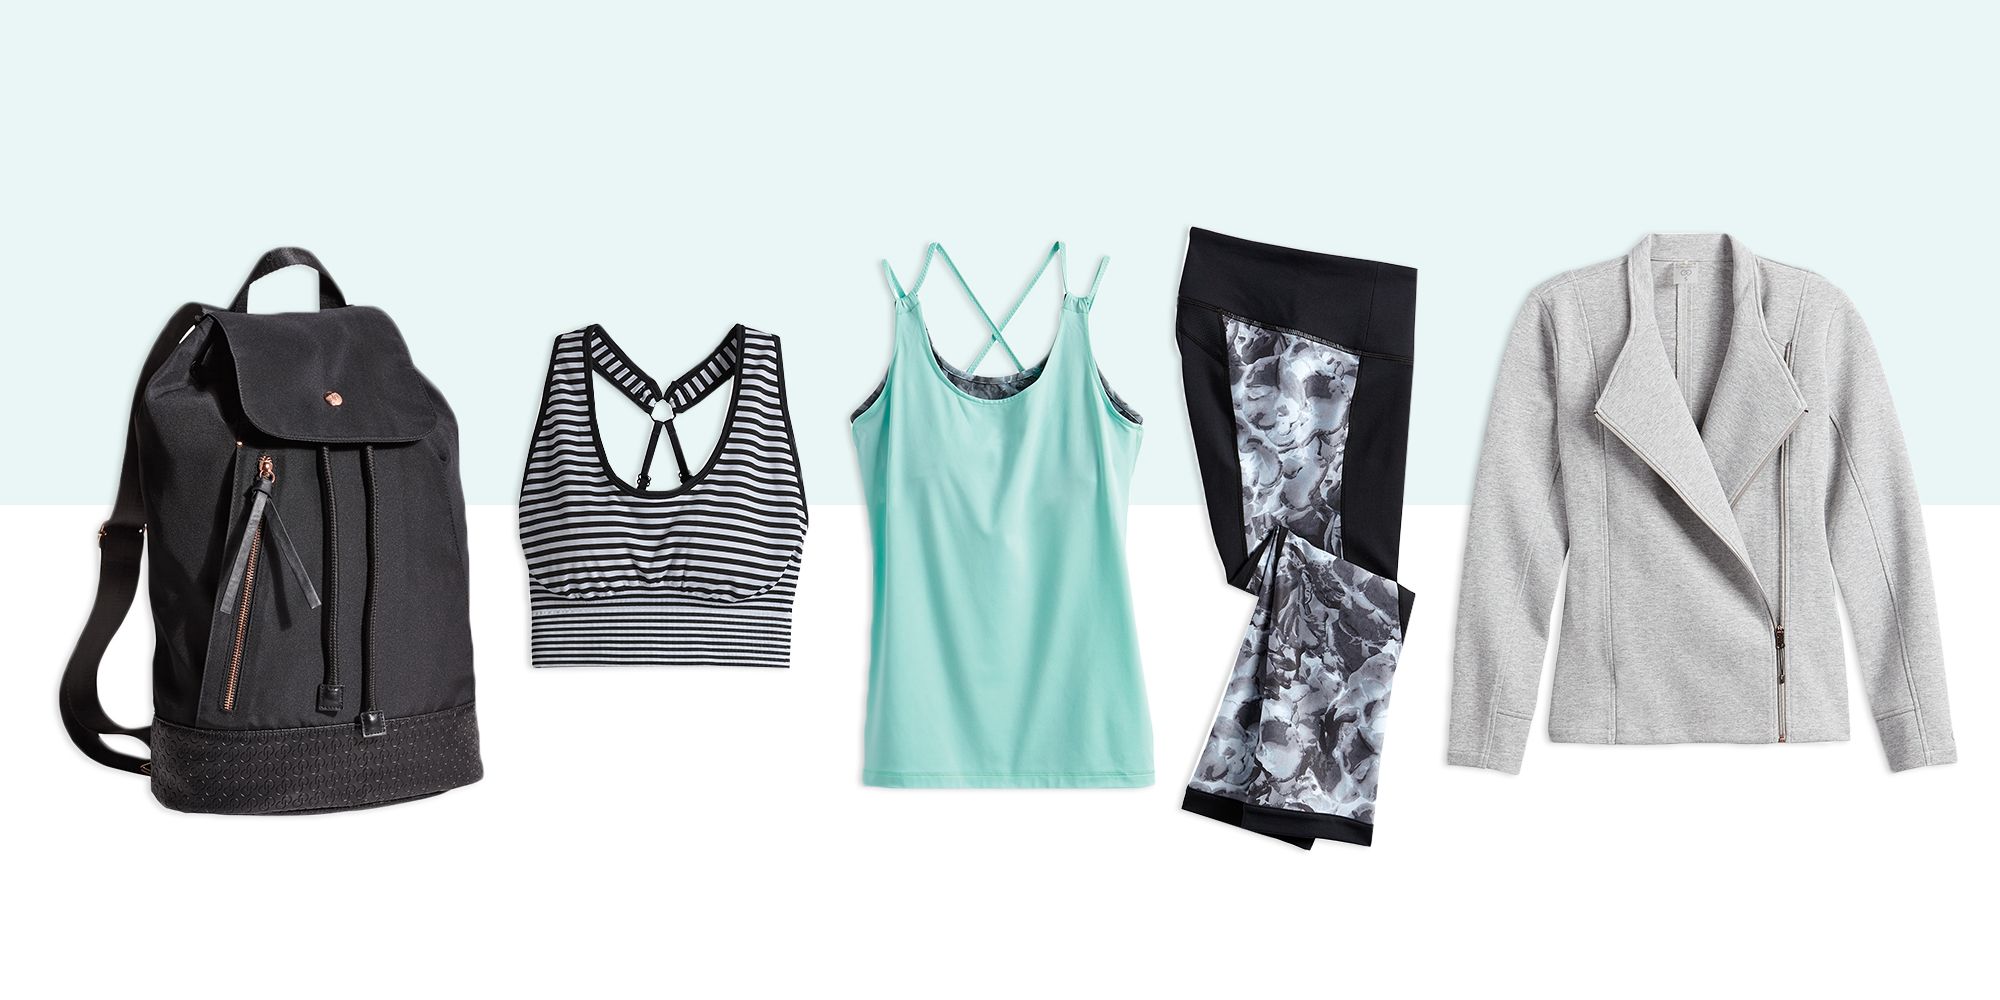 10 Best Pieces from CALIA by Carrie Underwood 2018 - Carrie Underwood's  Fitness Clothing Line